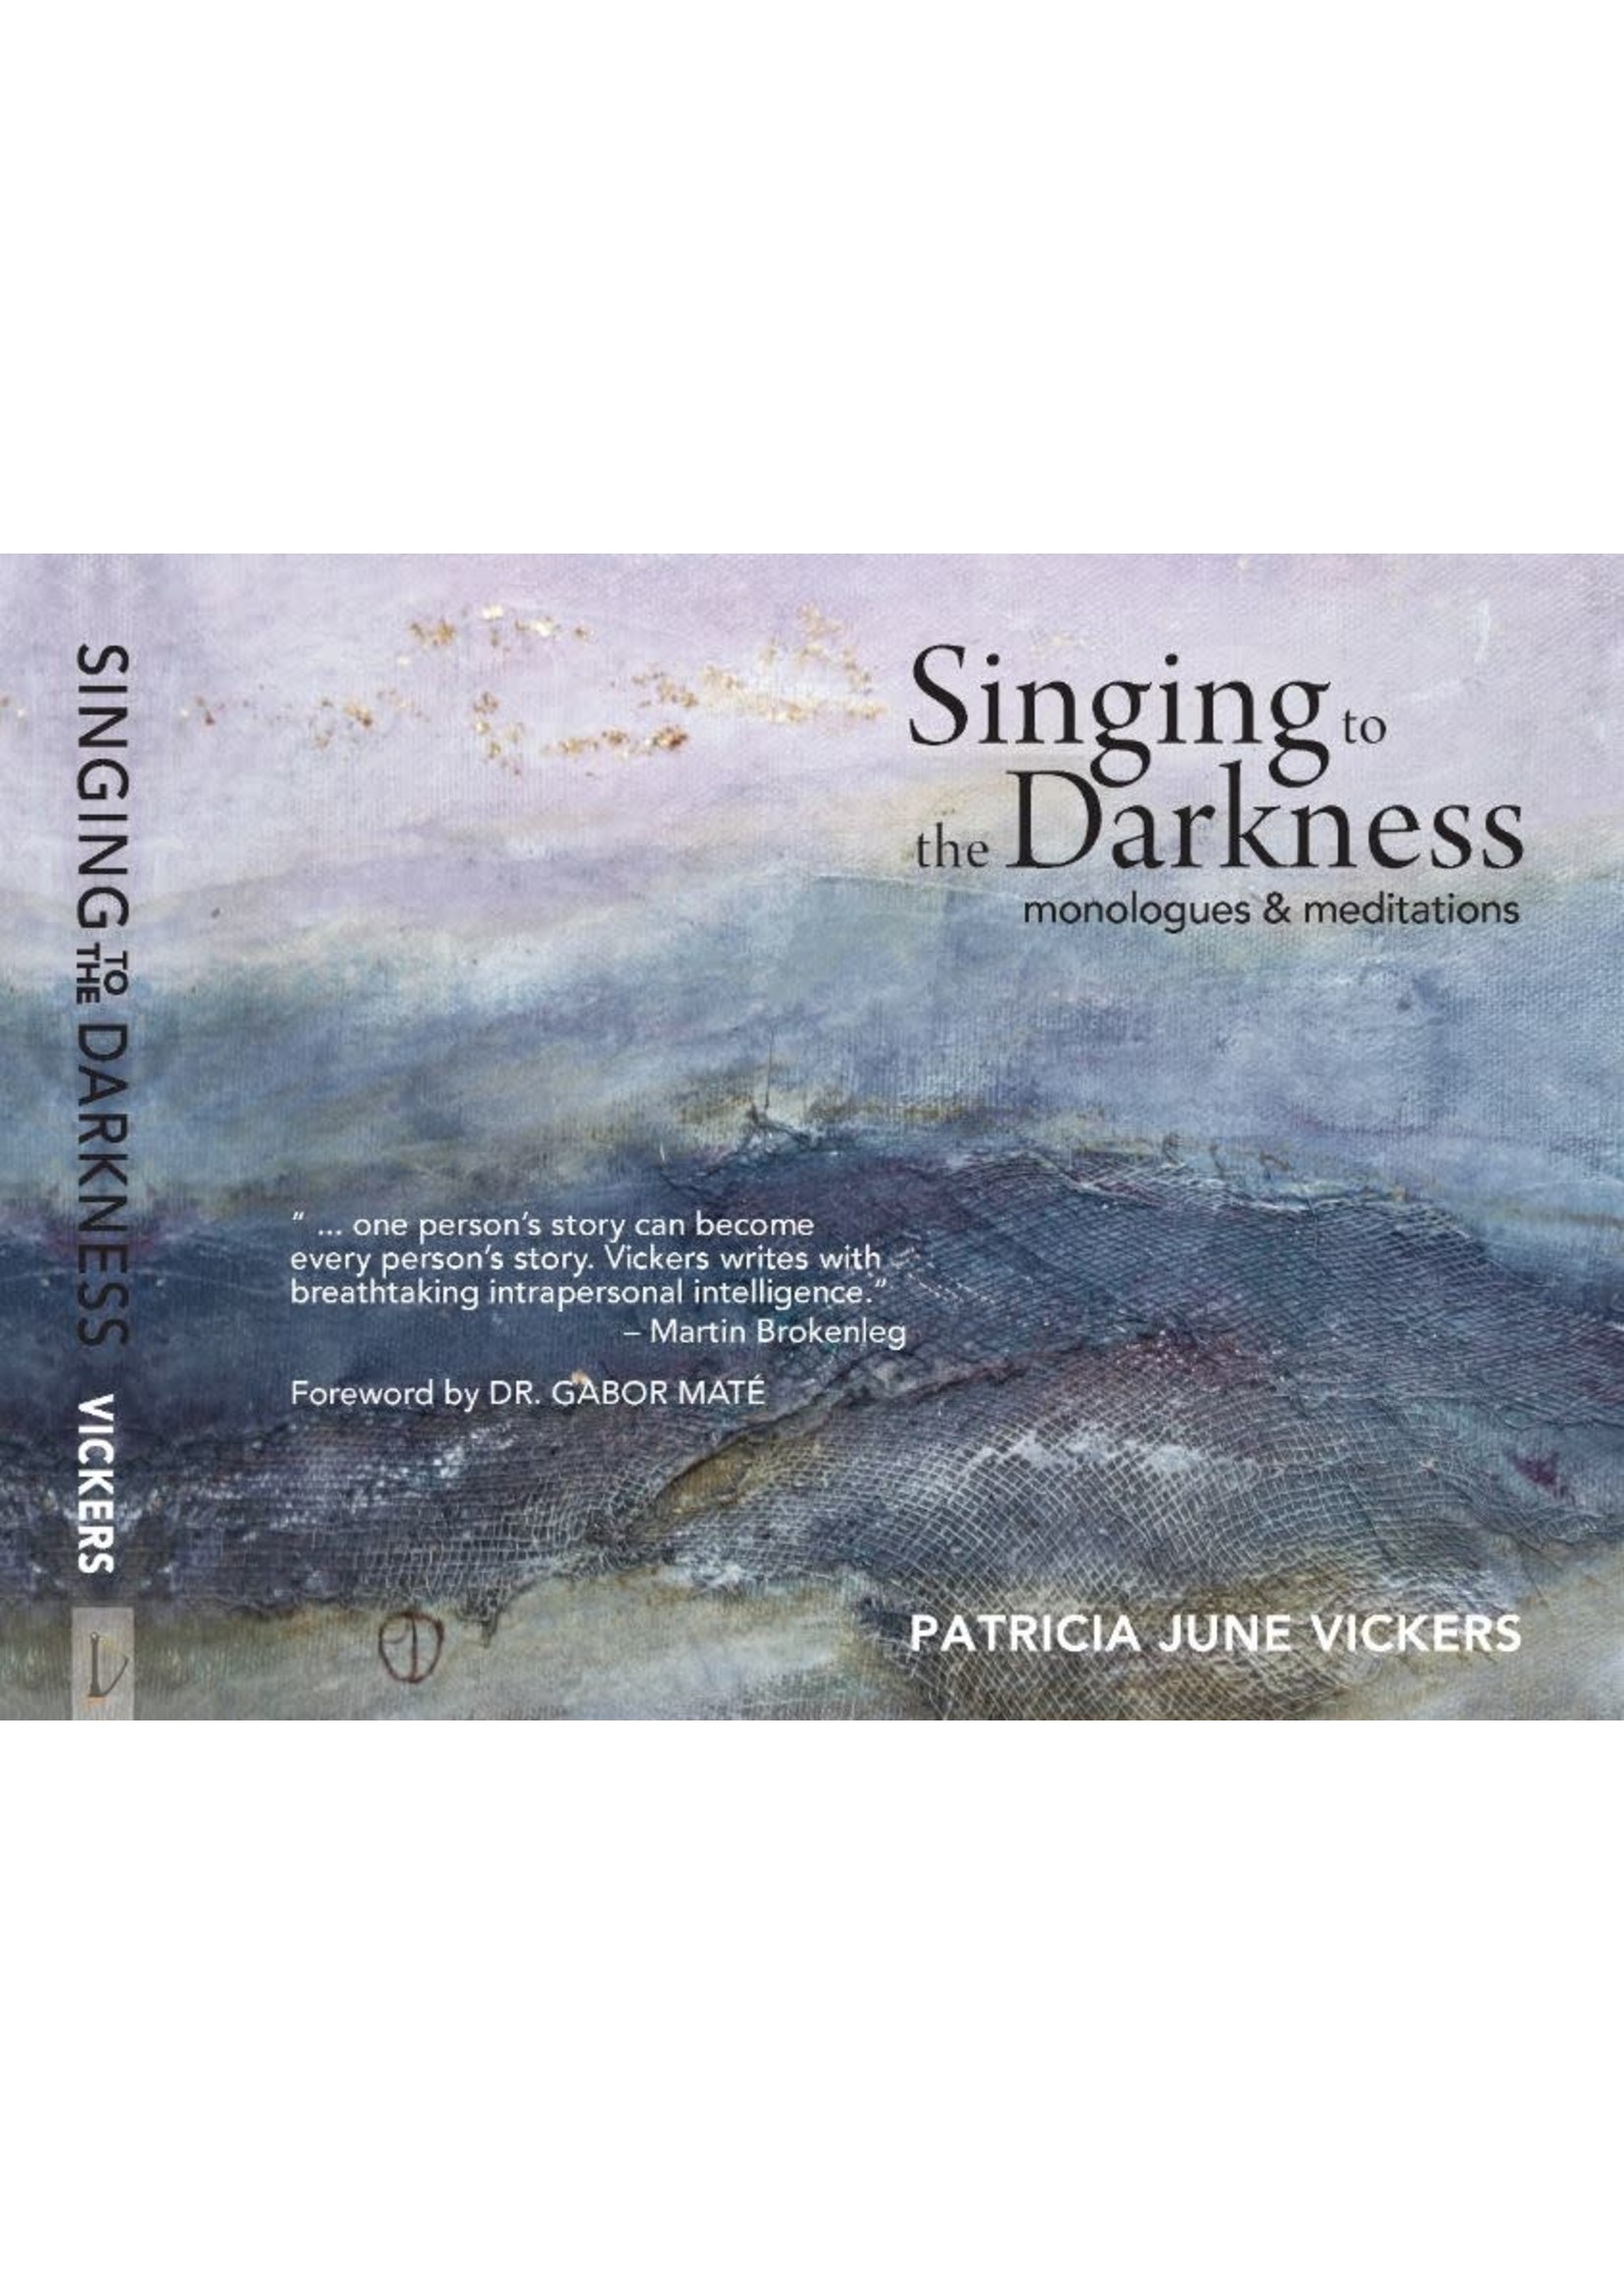 Singing to the Darkness: Monologues & Meditations by Patricia June Vickers